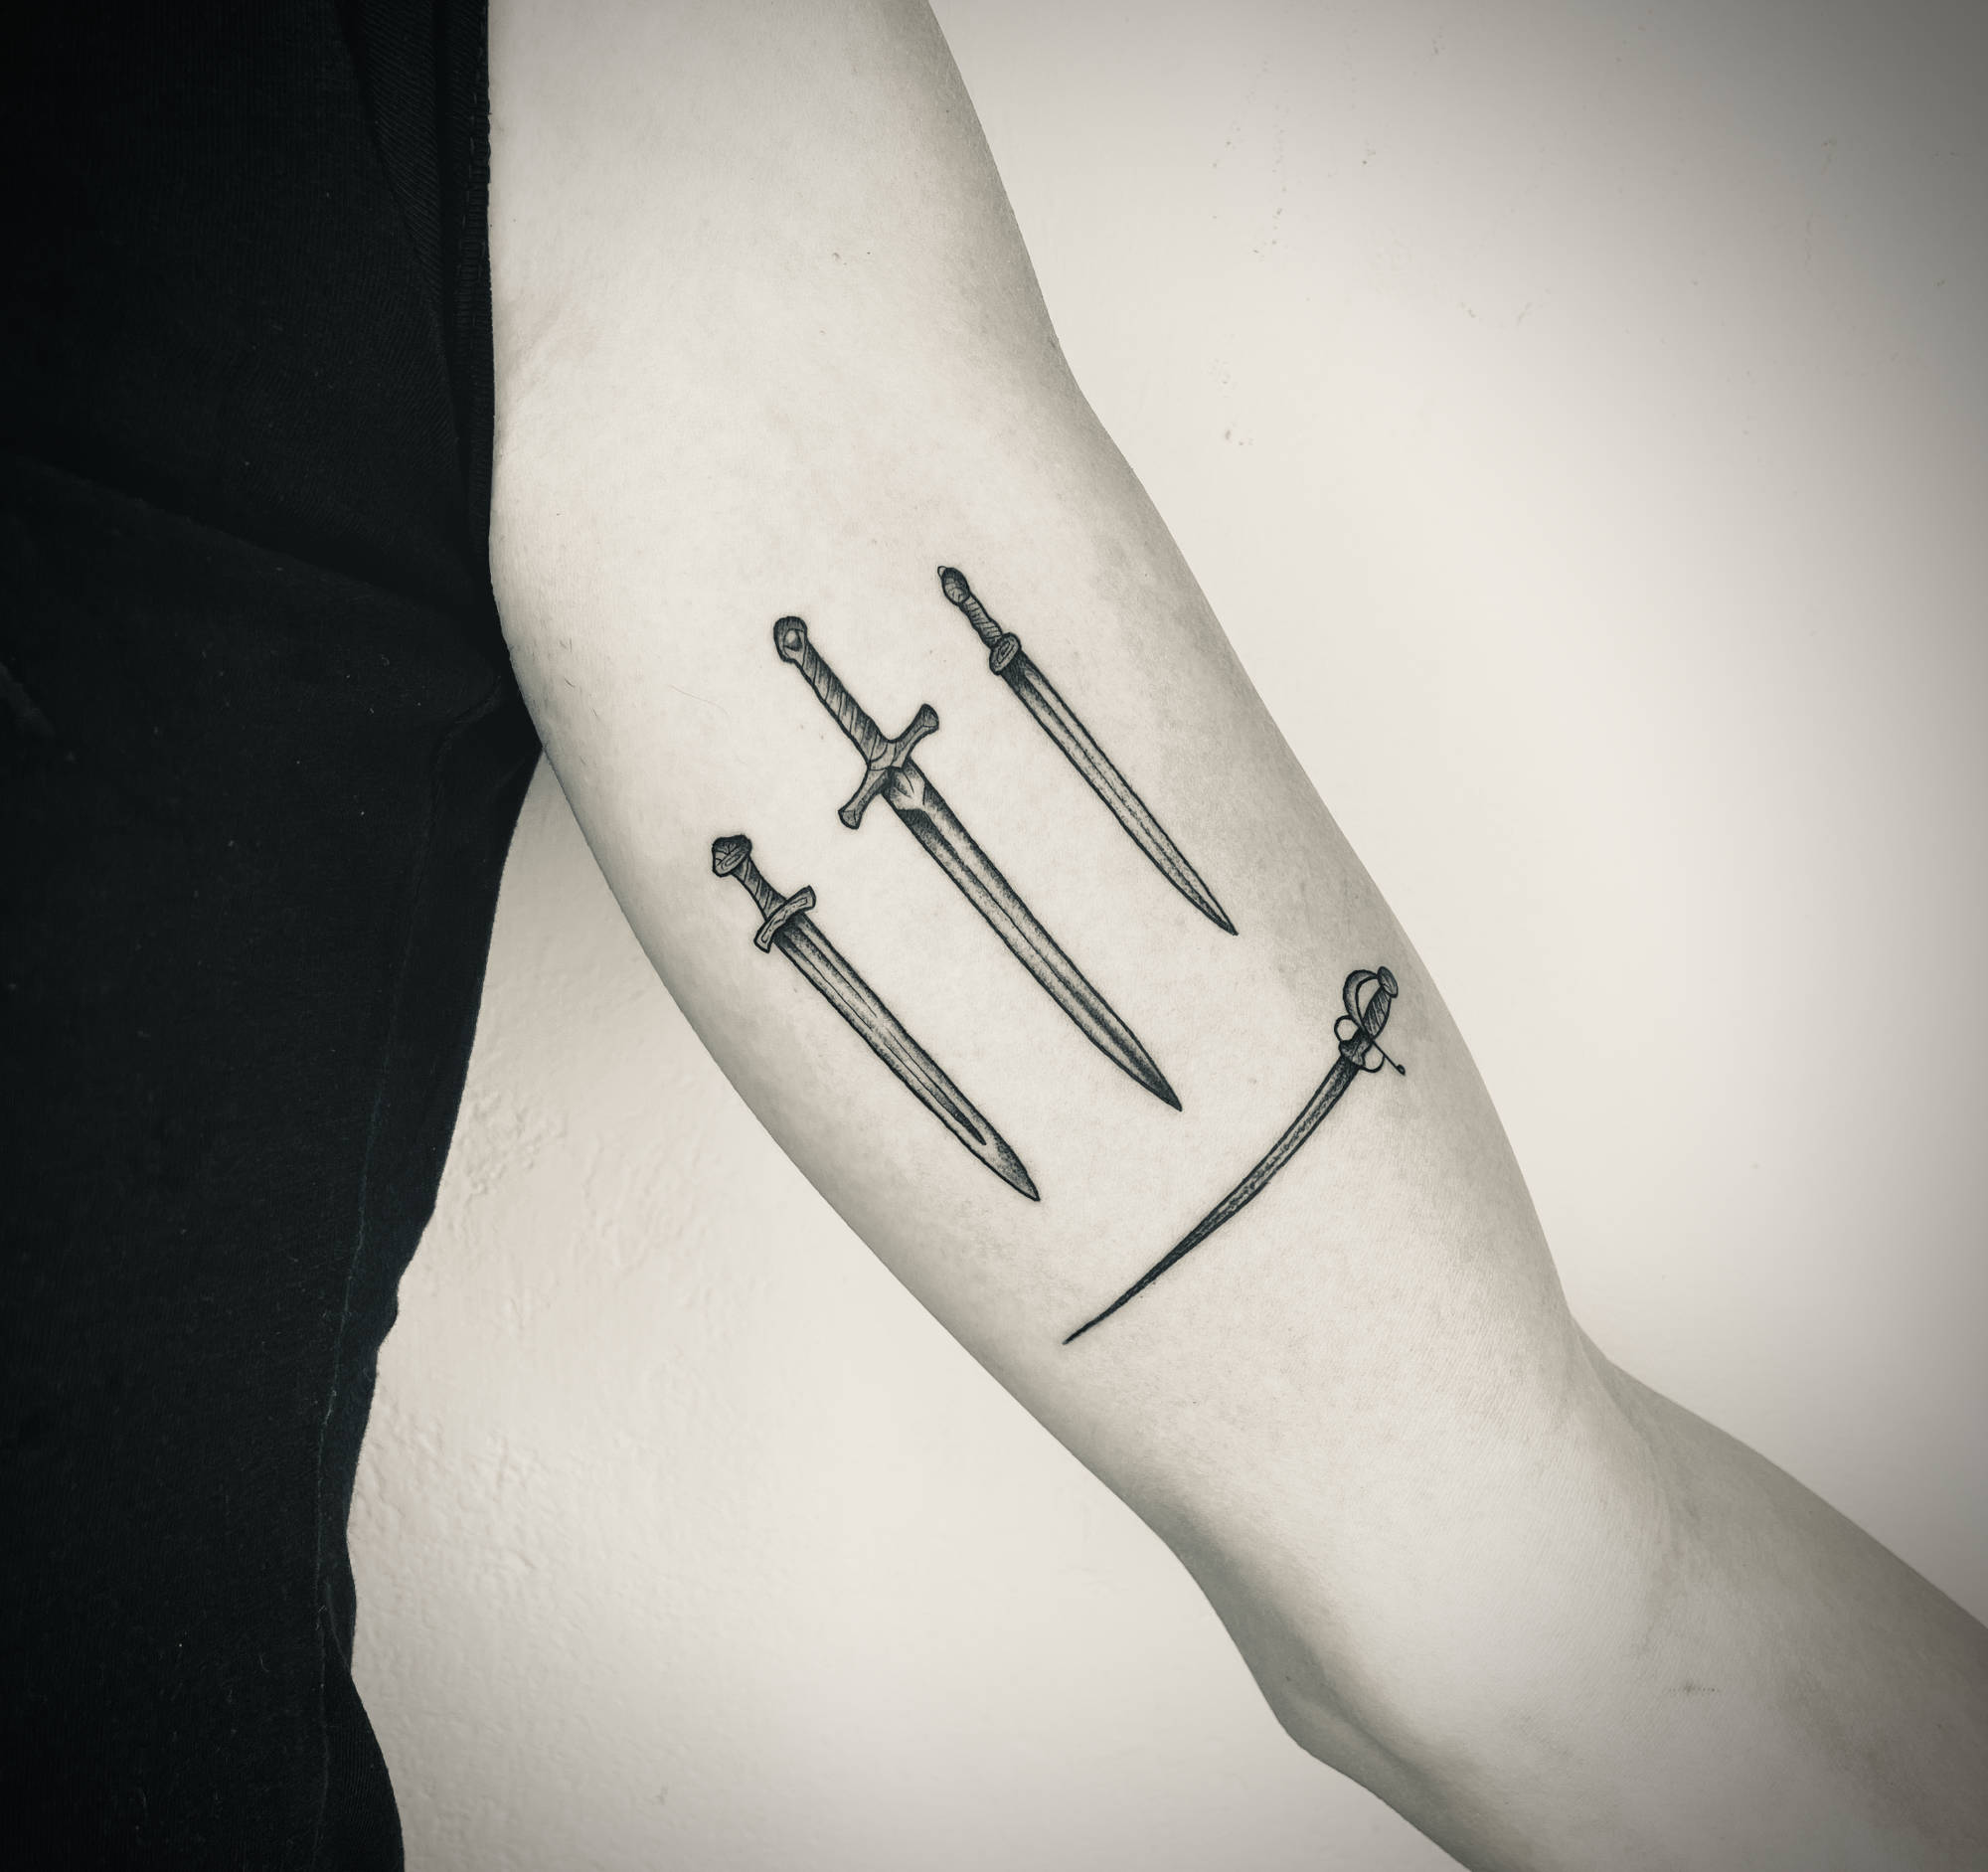 Upper arm with a tattoo of four swords